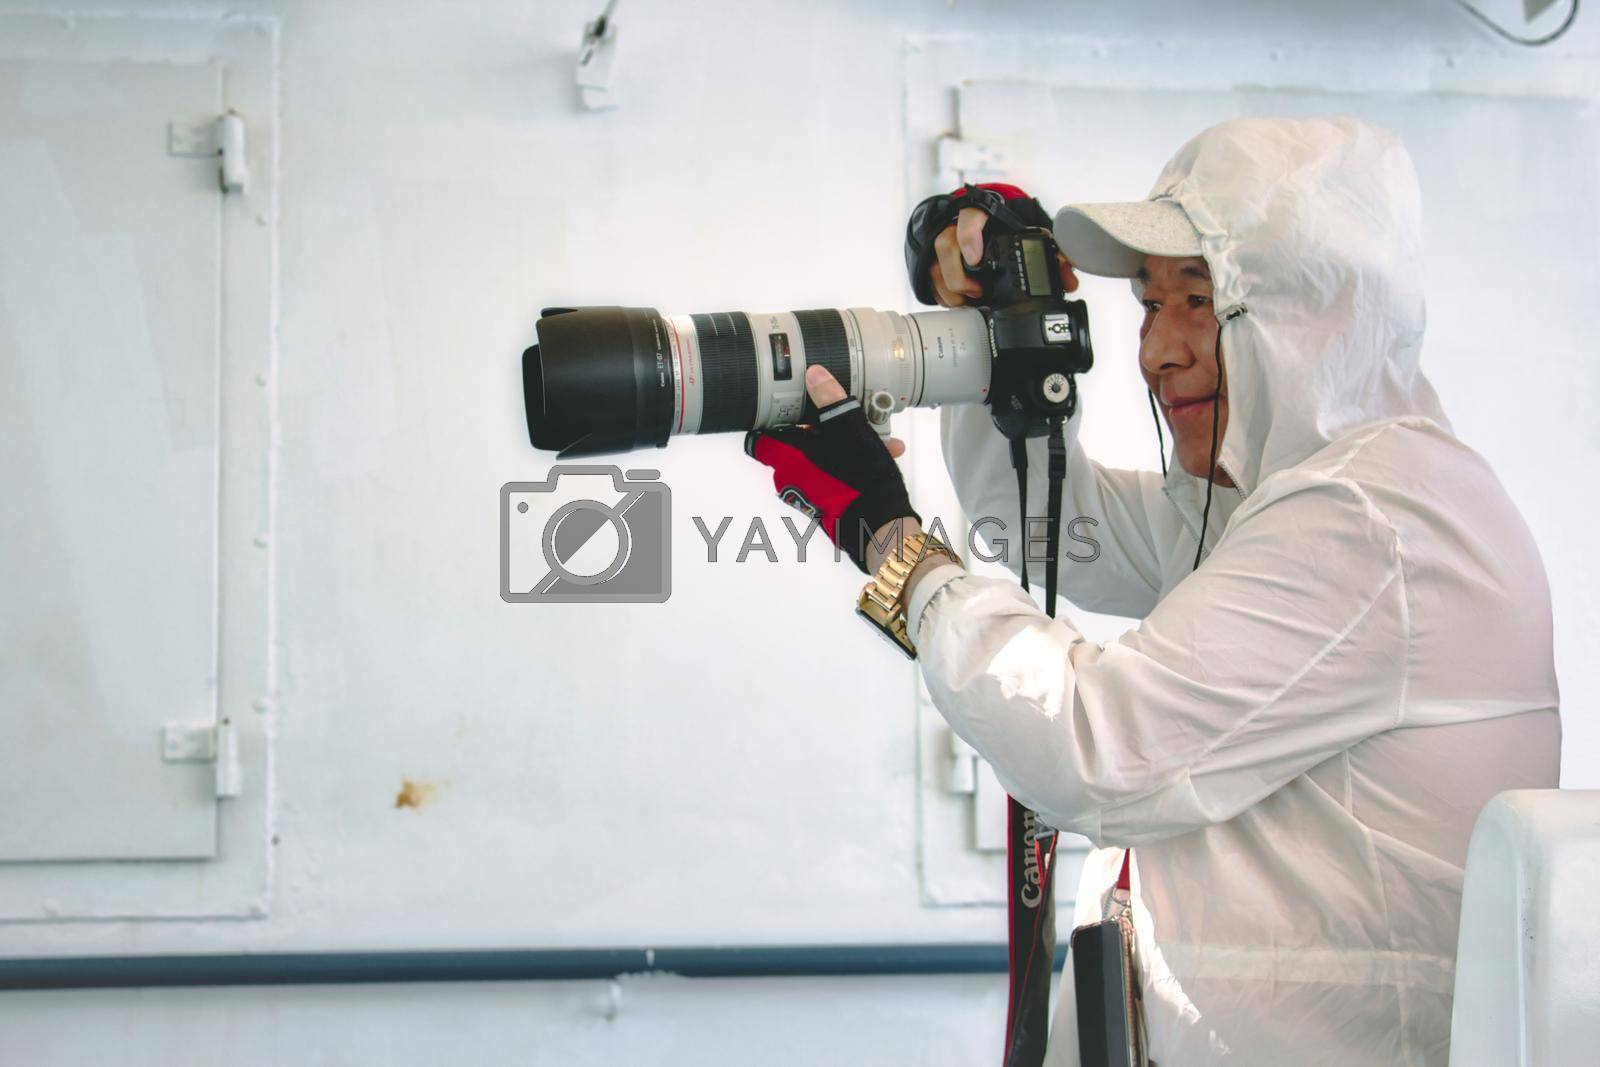 Royalty free image of Gozo / Malta - June 28 2019: A Japanese man taking a picture on board the Gozo/Malta ferry with a professional Canon long-range camera by tennesseewitney